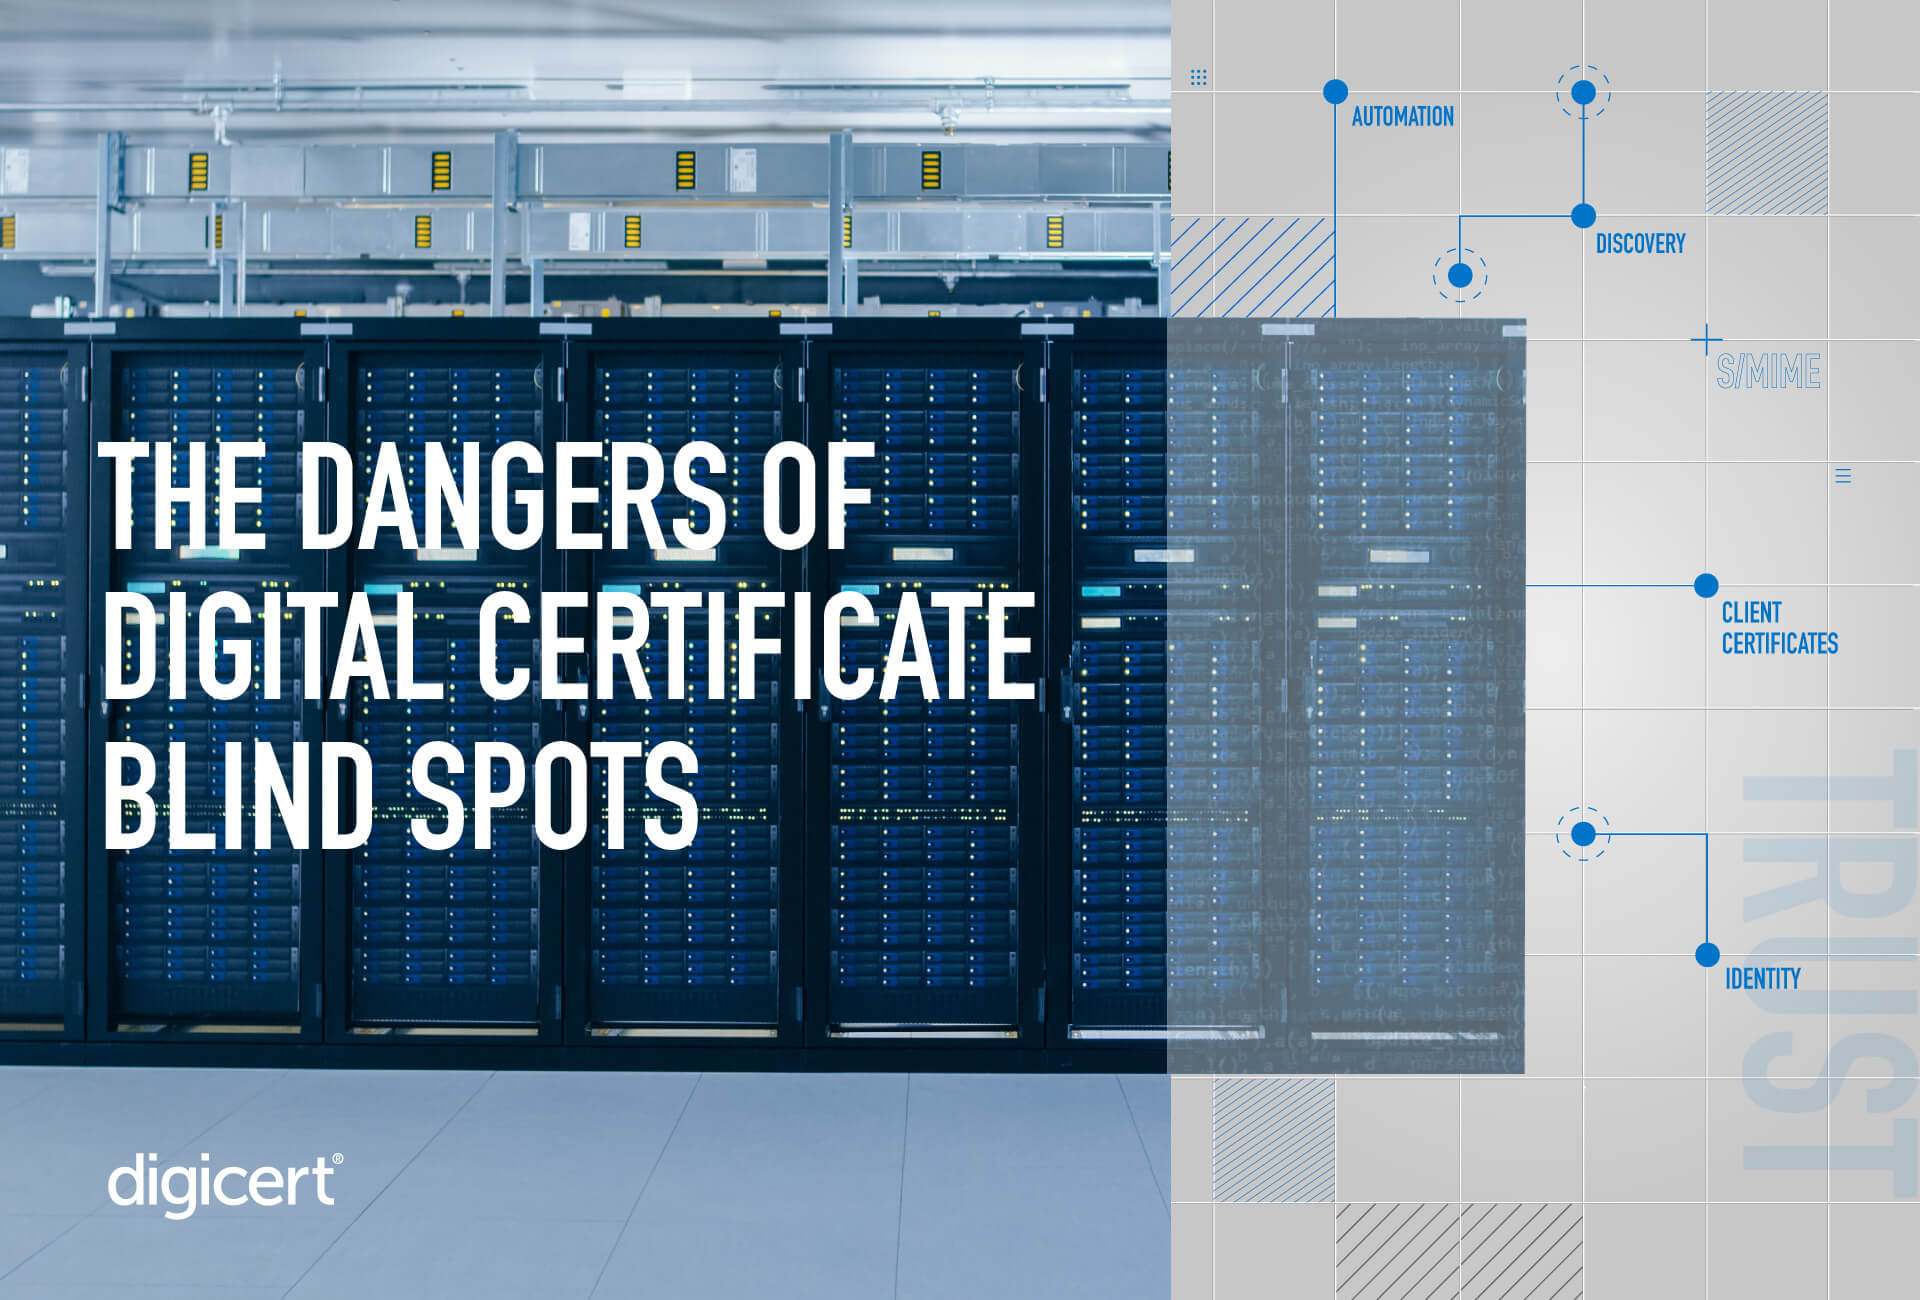 Want To Achieve Digital Trust? Start By Centralizing Visibility Over Your Digital Certificates